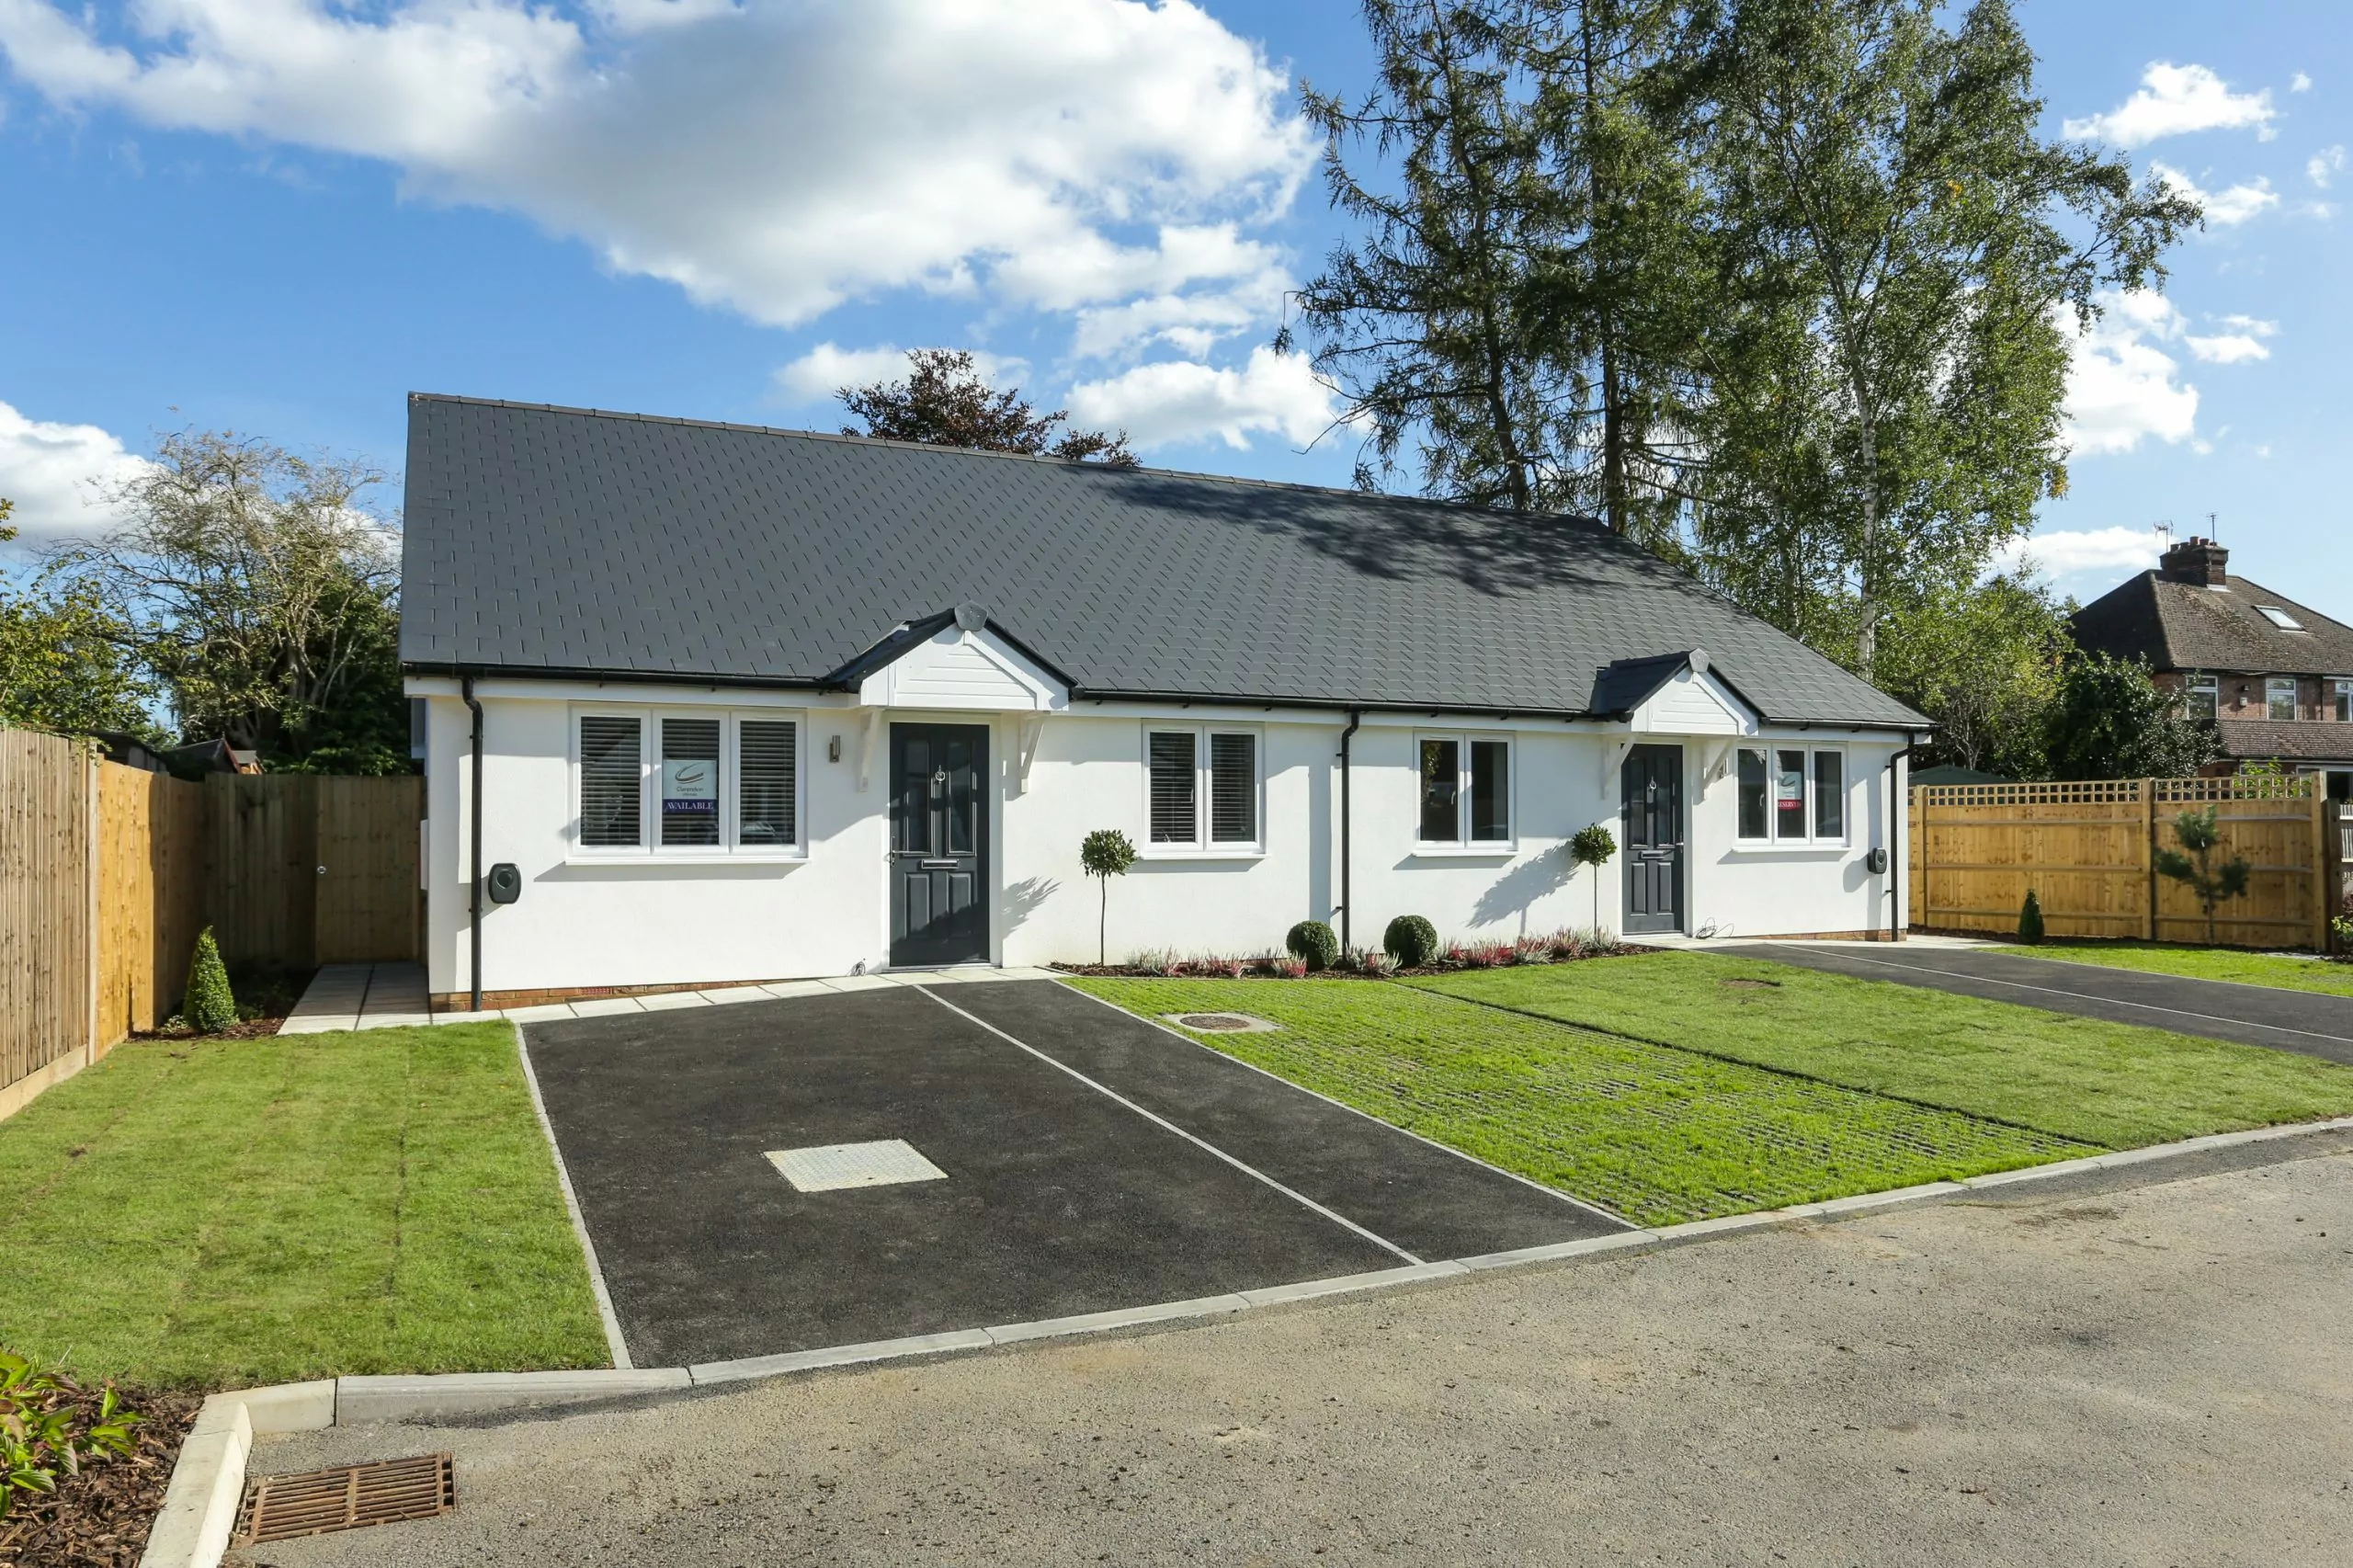 Two new build bungalows at Mulberry Place Phase 2 with landscaped front lawns